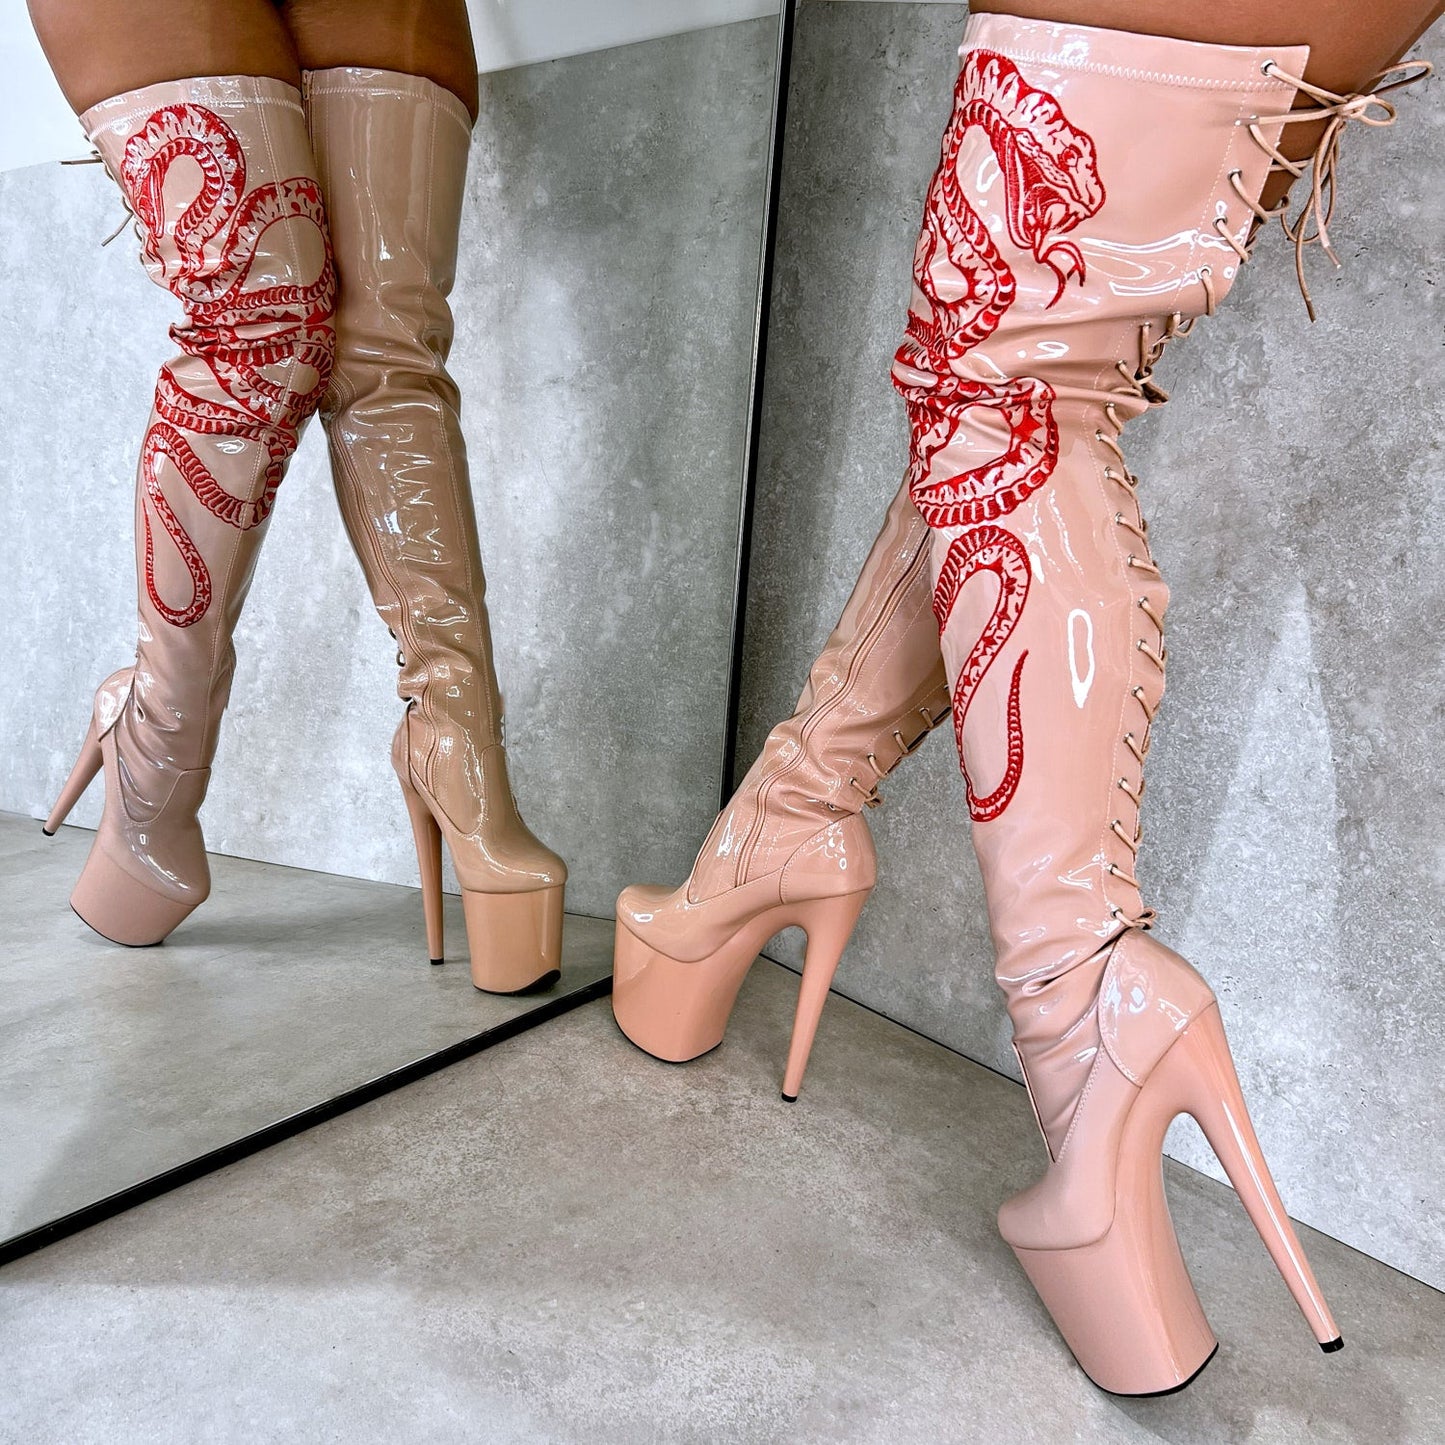 VIPER Boot Tan with Red Thicc Thigh High - 8INCH